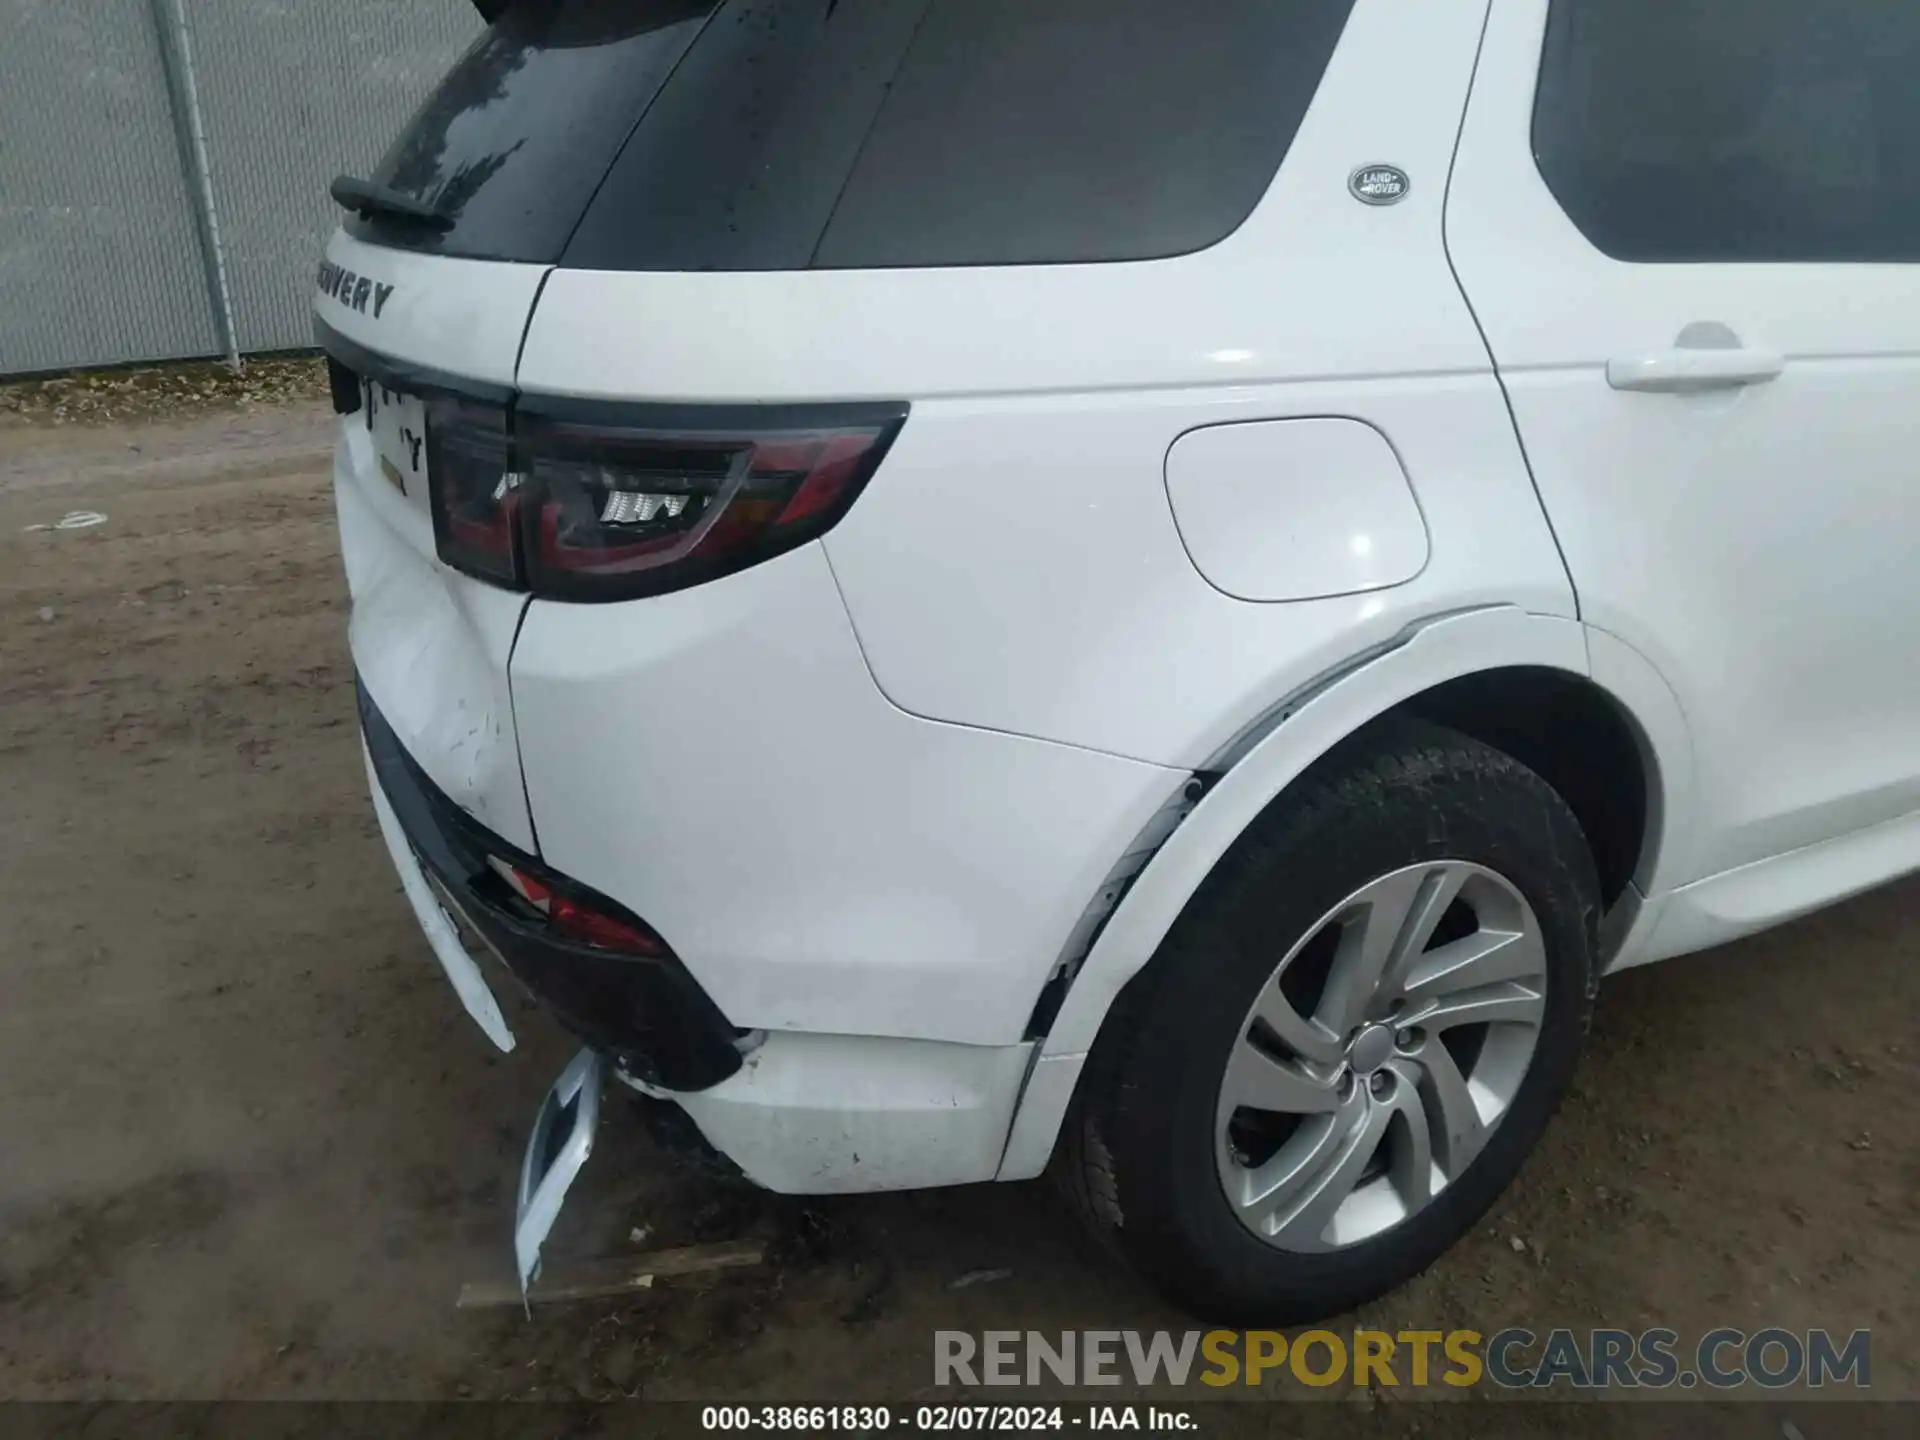 18 Photograph of a damaged car SALCT2FXXLH859485 LAND ROVER DISCOVERY SPORT 2020